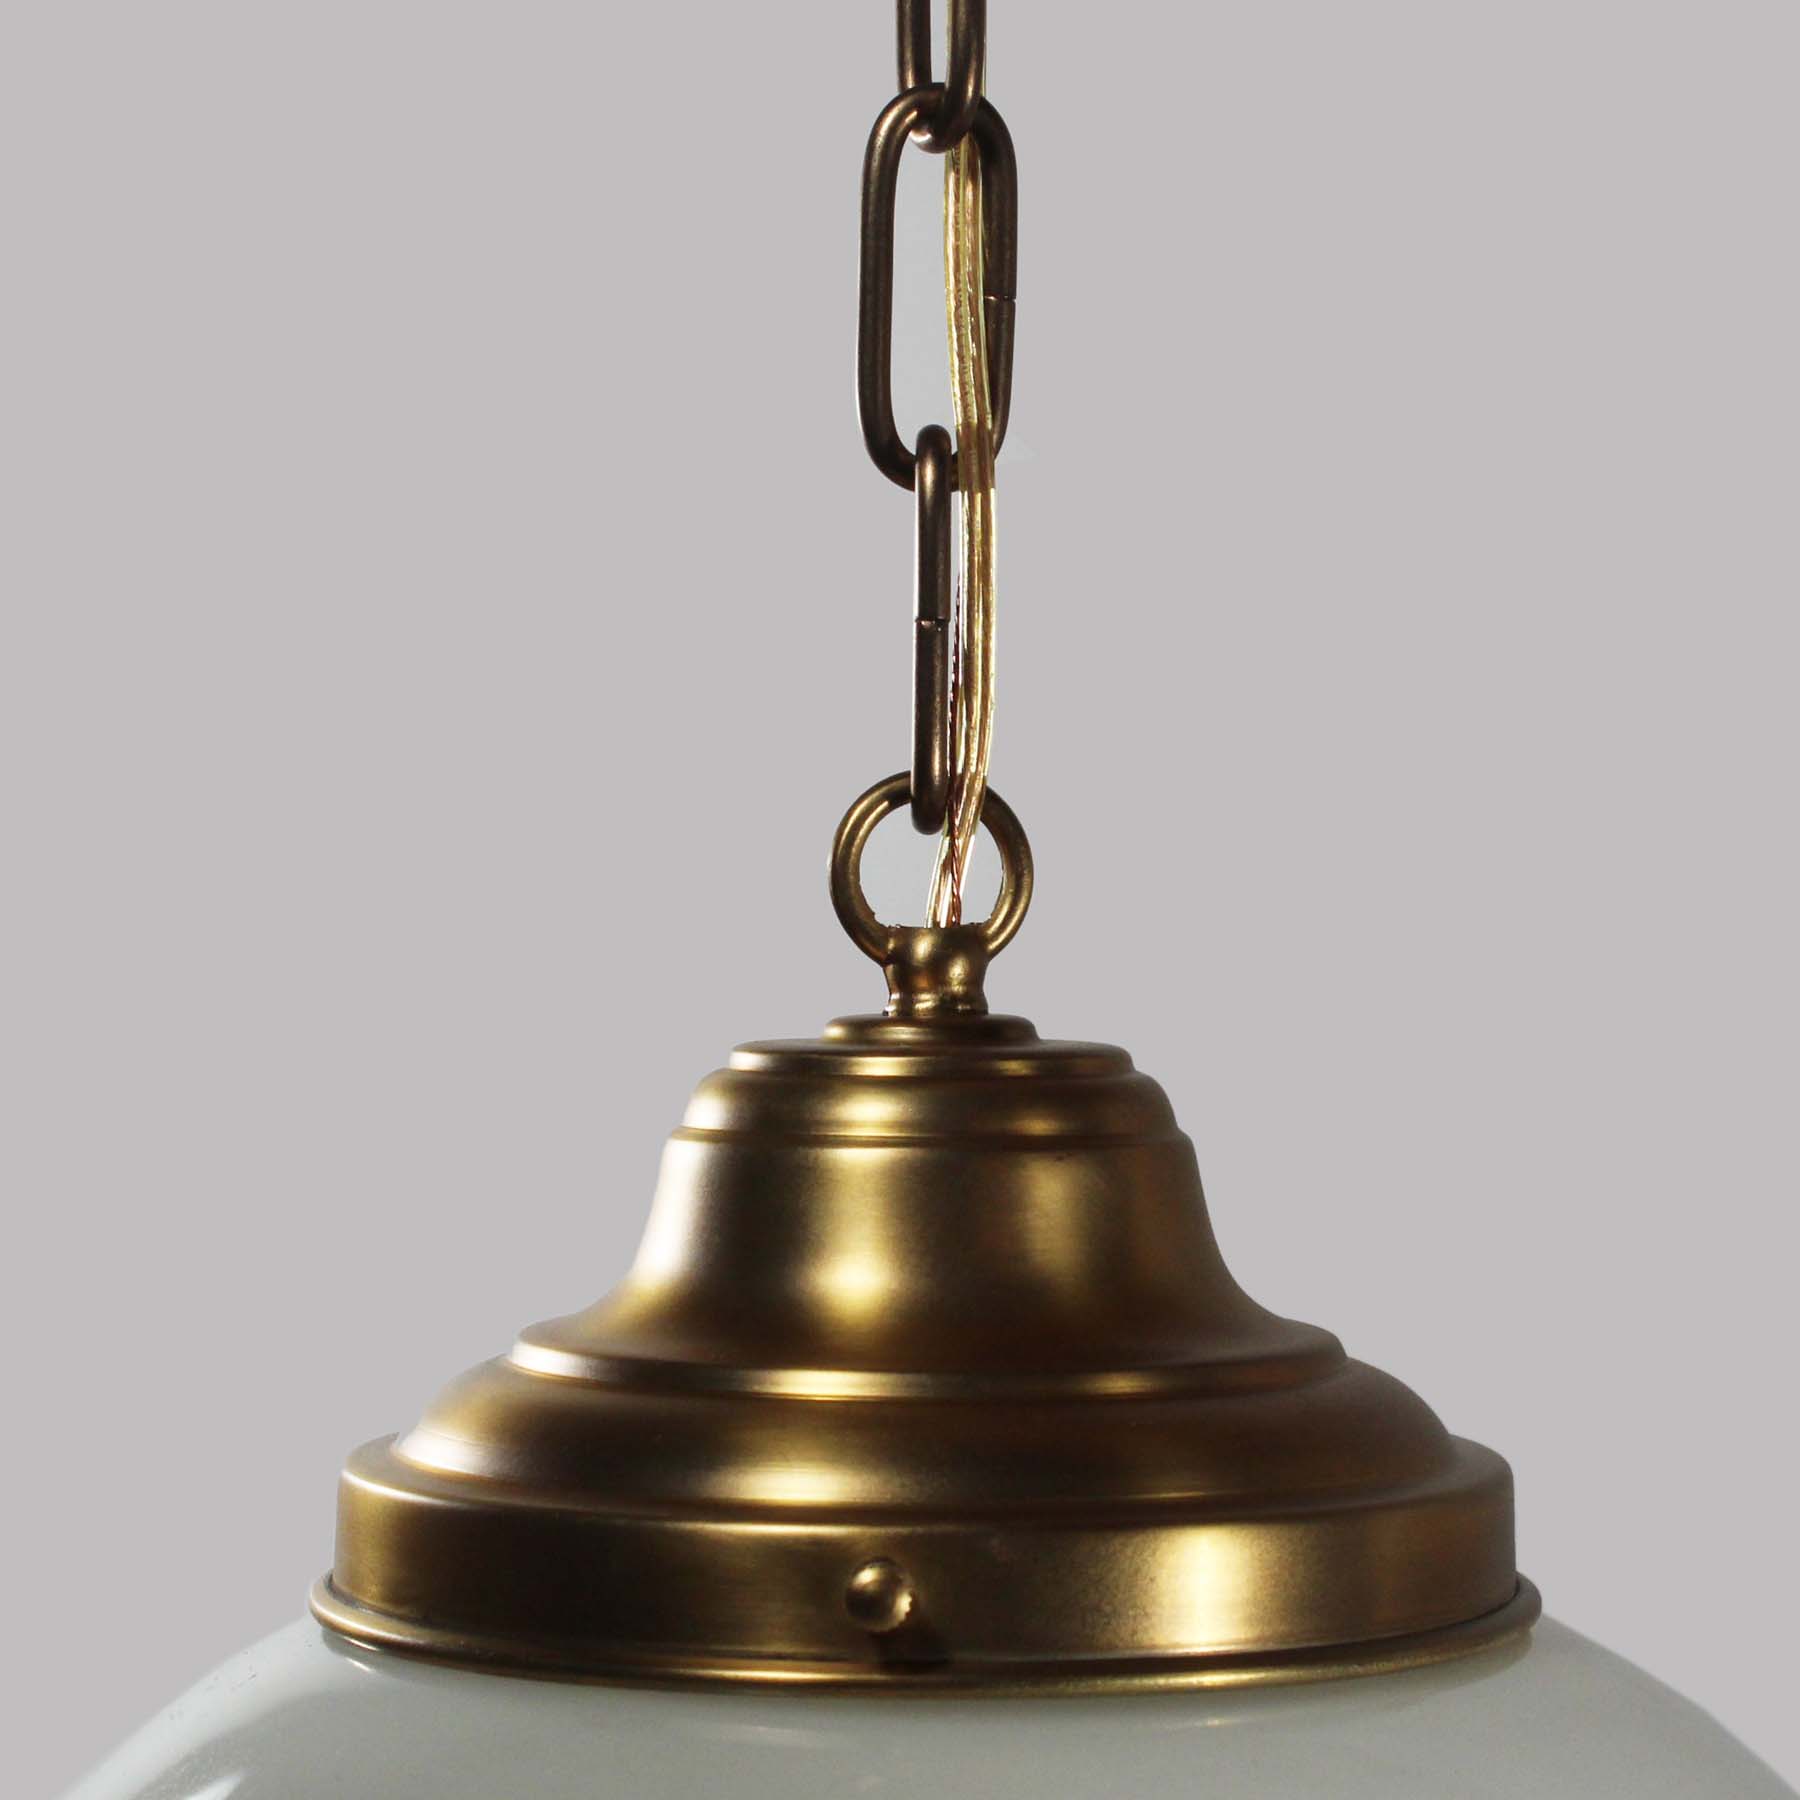 Matching Antique Pendant Lights with Original Glass Shades-71823